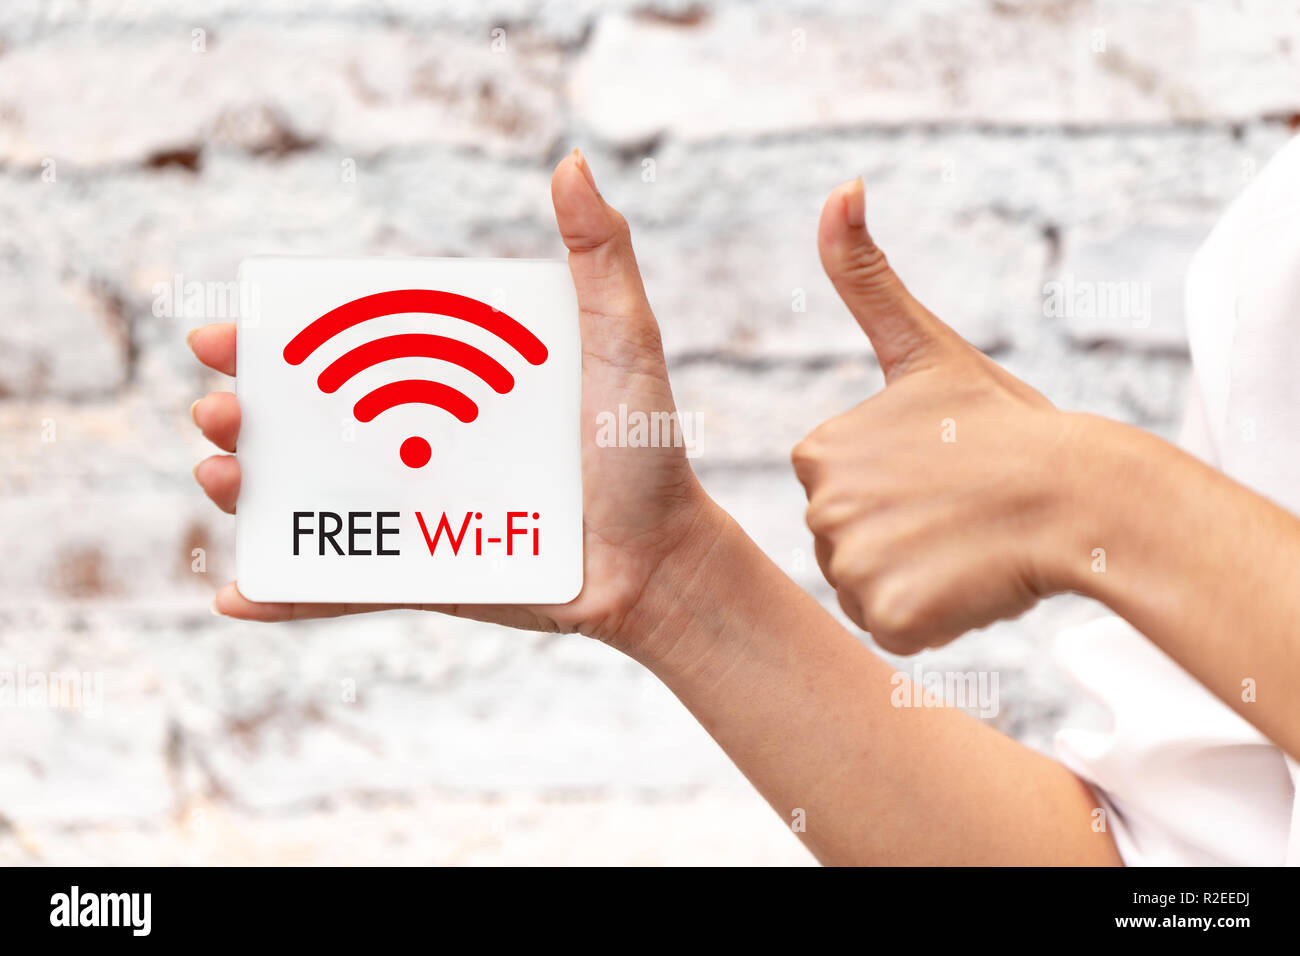 free wifi sign symbol illustration thumbs up for good best and safe service internet access. Stock Photo